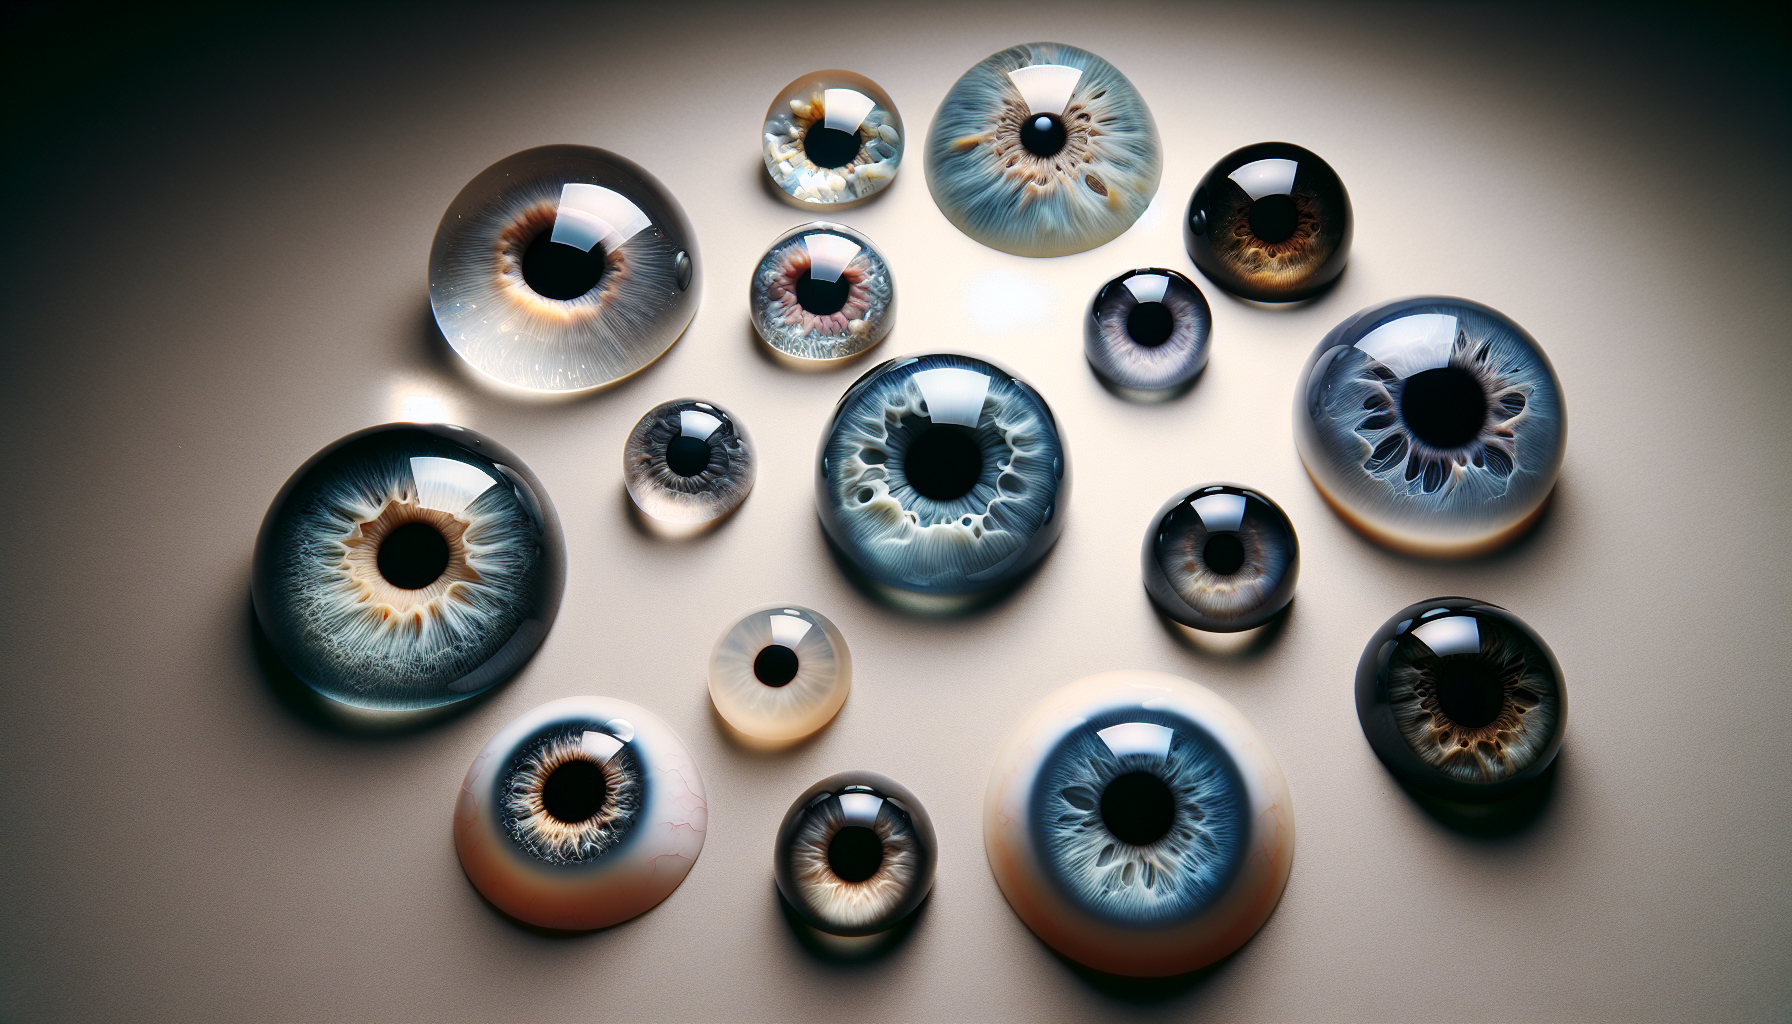 Various prosthetic eyes made from different materials as imagined by AI - For illustration only-Image created by AI